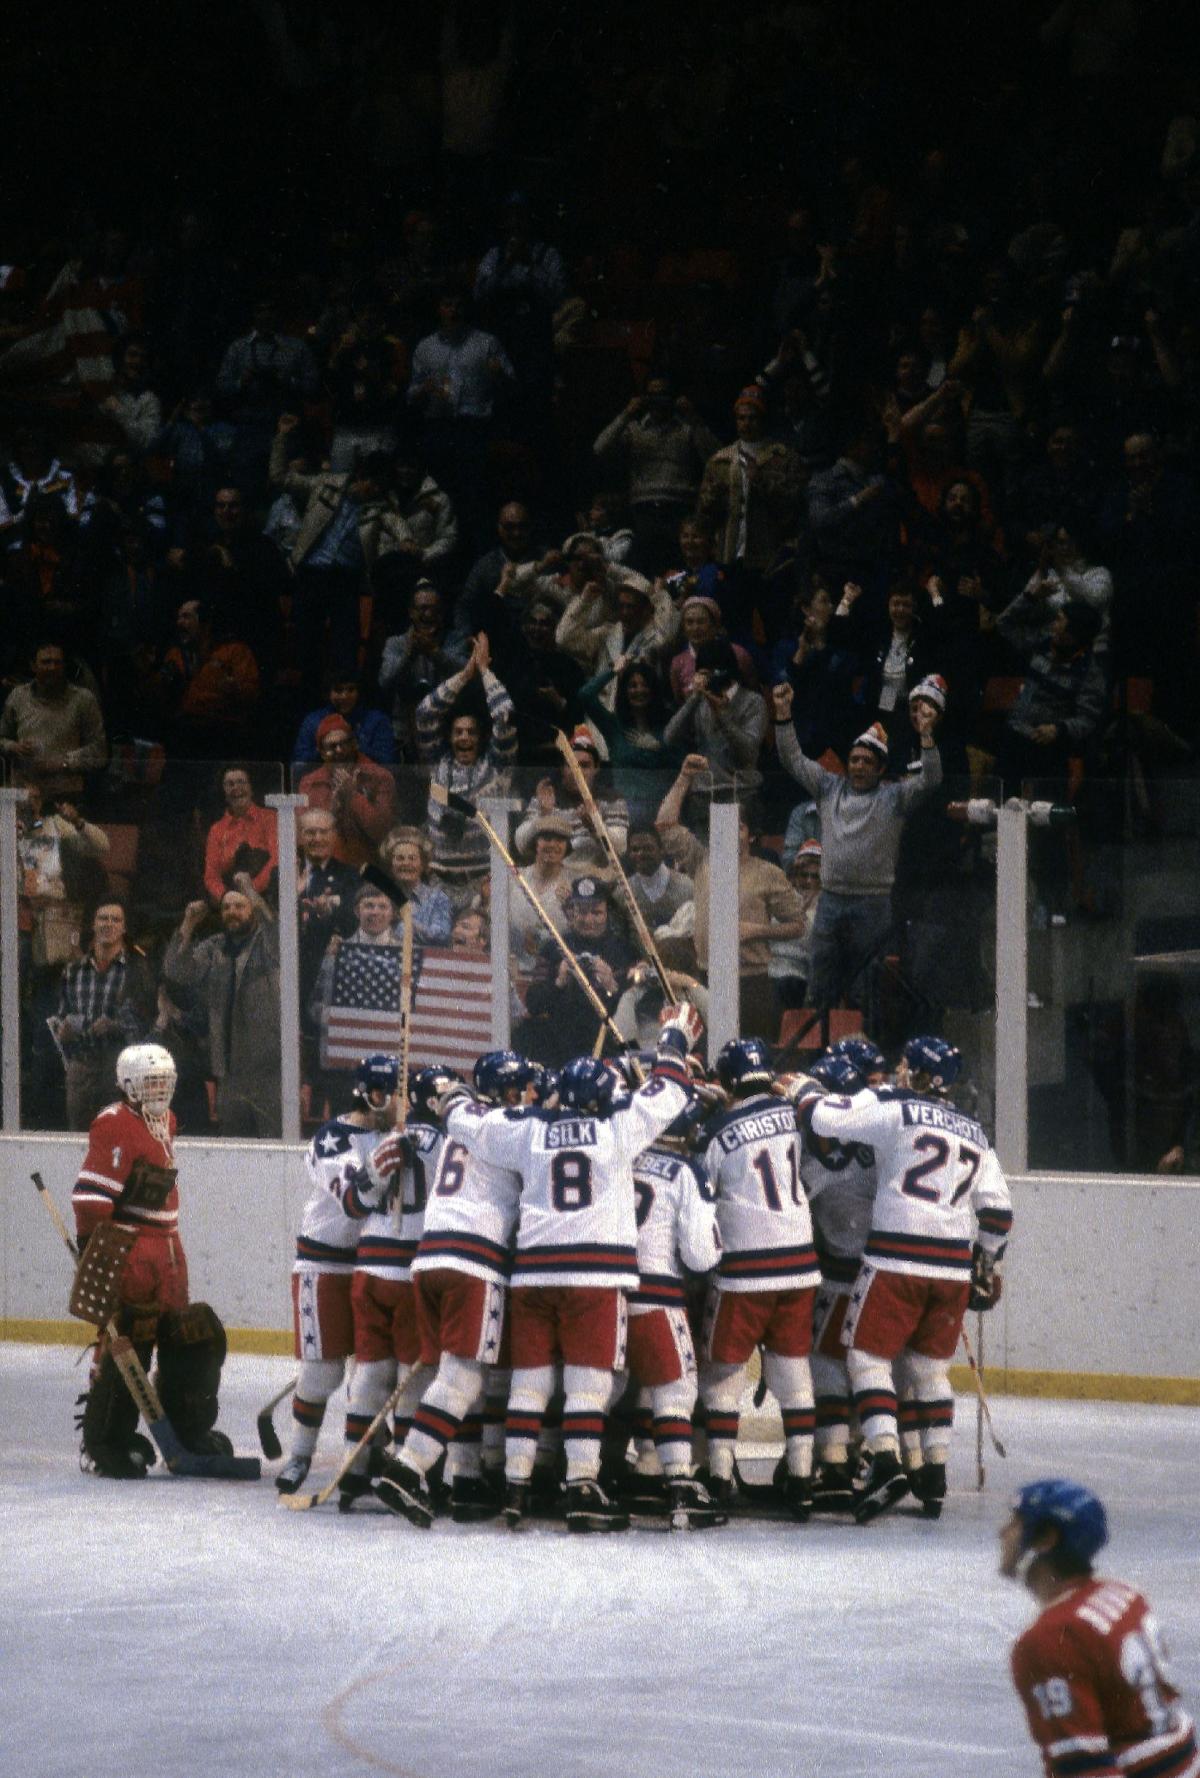 Miracle on Ice hockey team played in Buffalo before 1980 Olympics